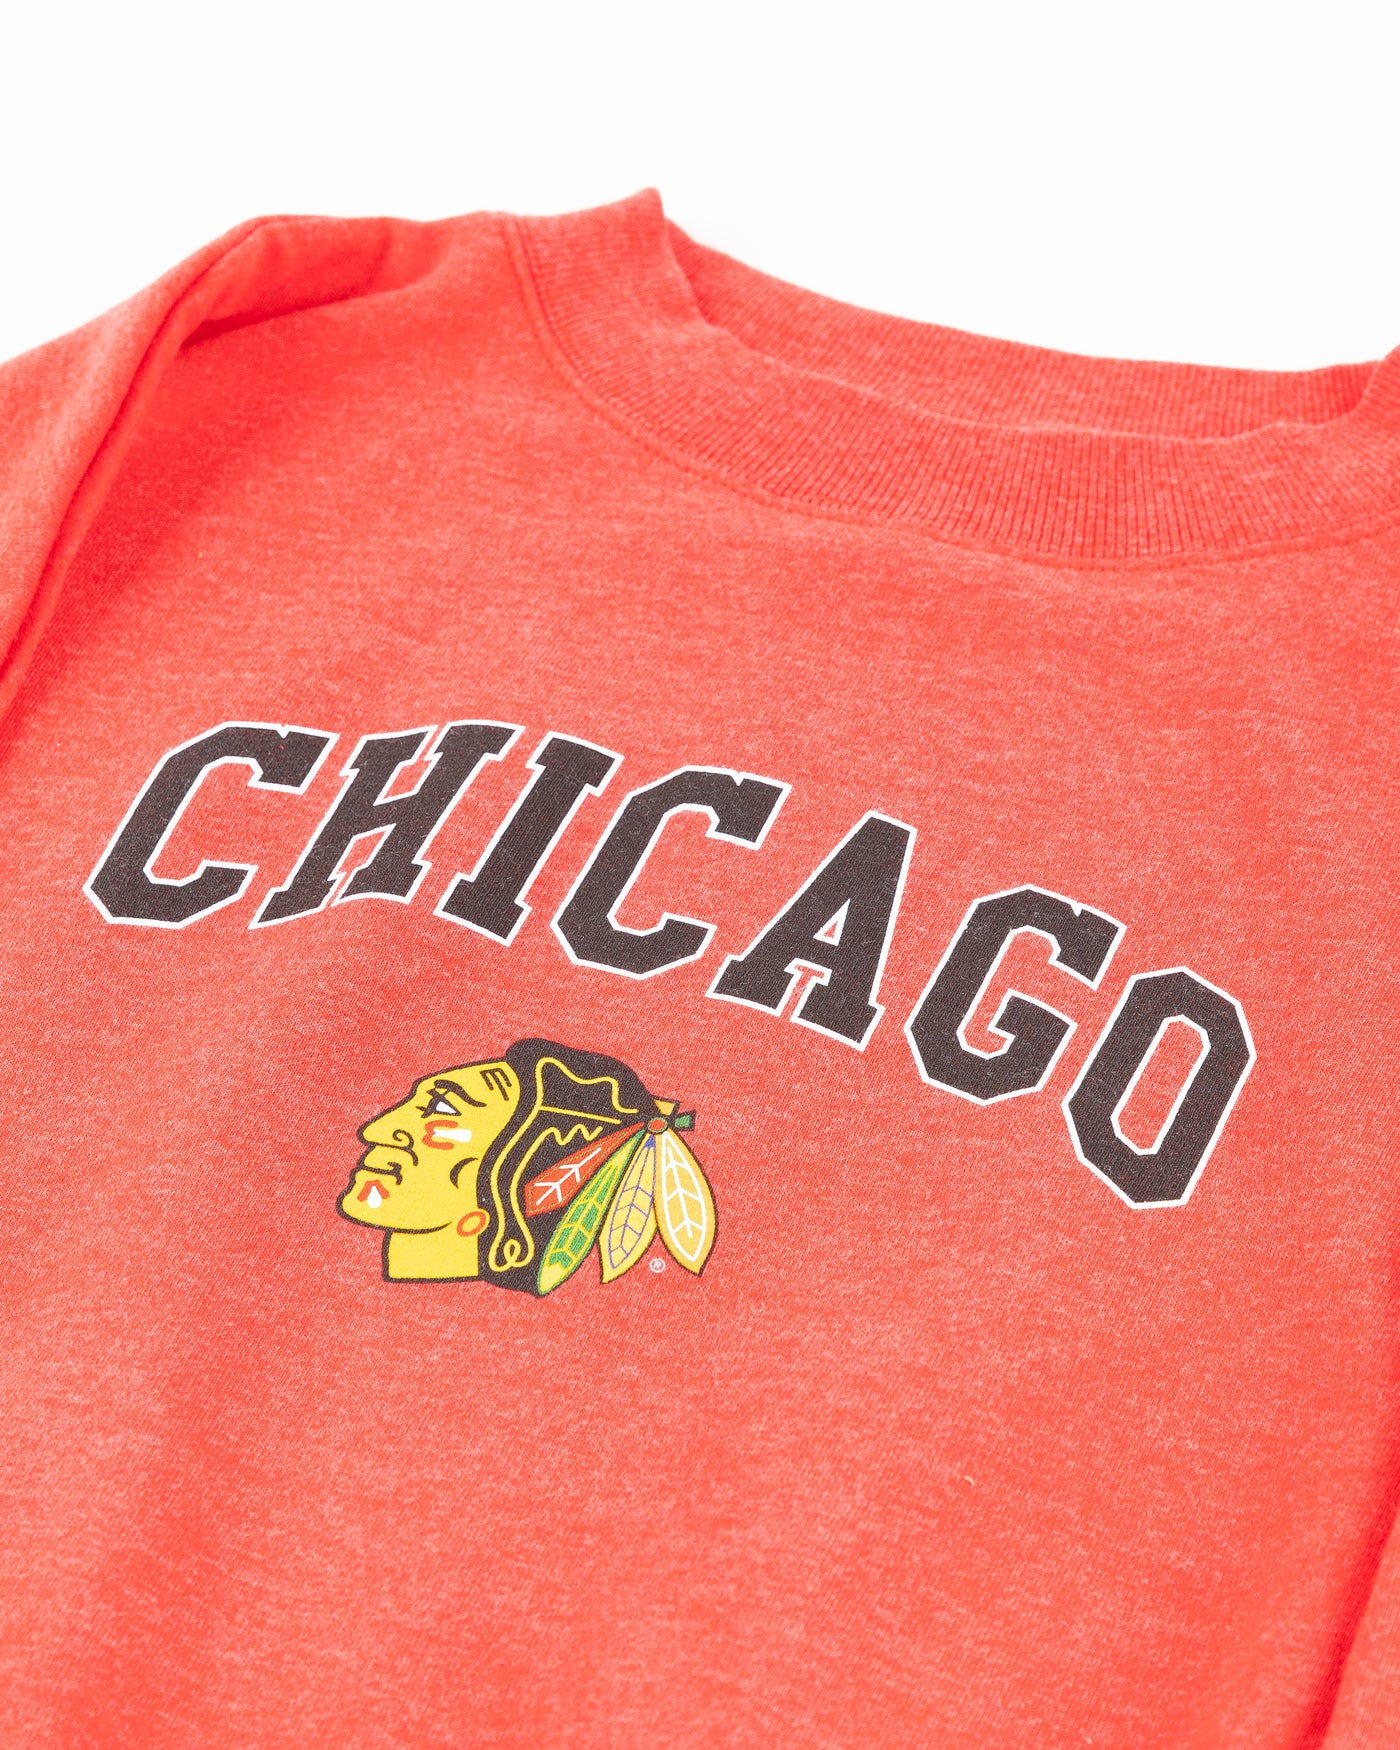 red ladies crewneck with Chicago wordmark and Chicago Blackhawks primary logo across front - detail lay flat